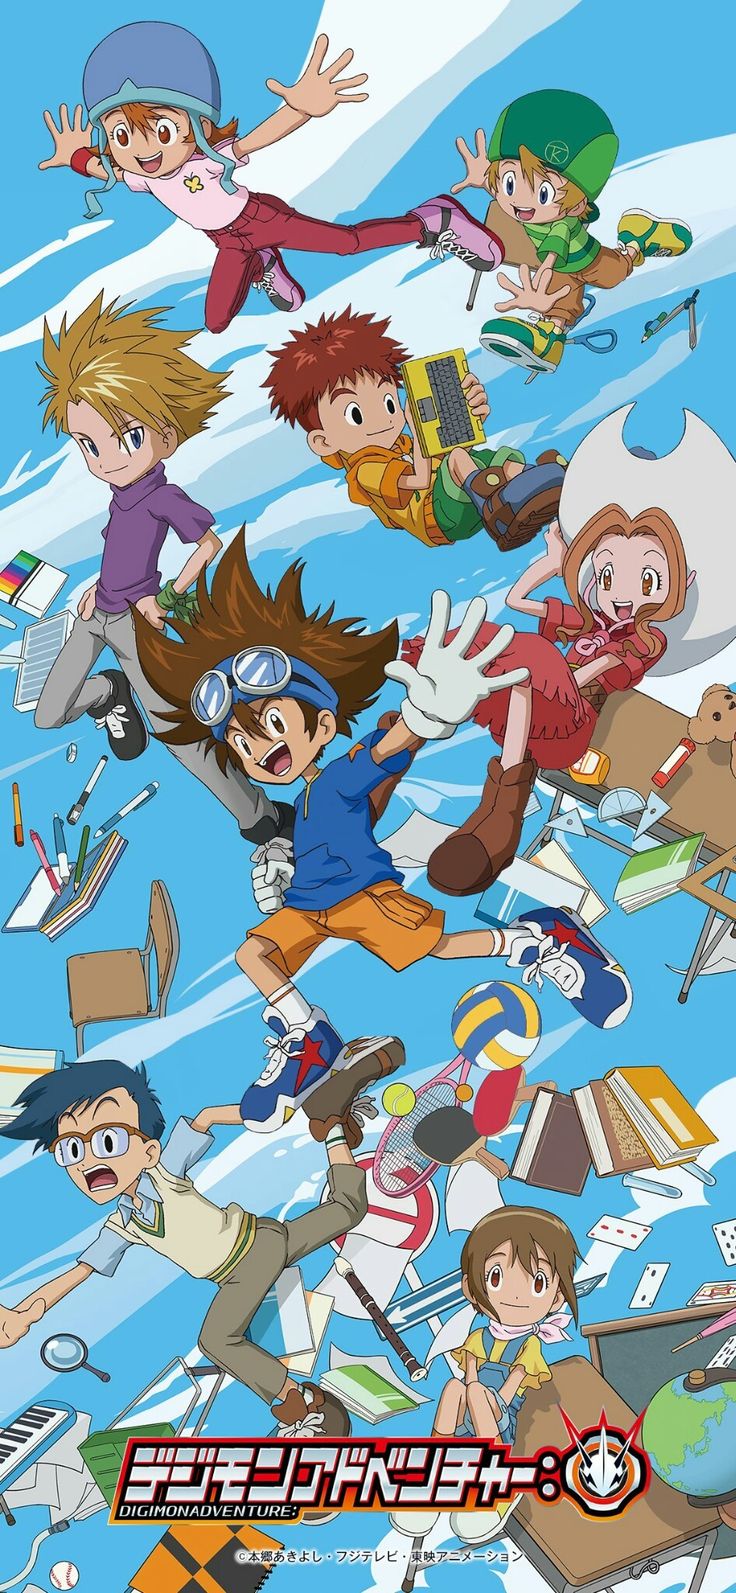 Tumblr is a place to express yourself, discover yourself, and bond over the stuff you love. It's where your interes. Digimon adventure, Digimon wallpaper, Digimon